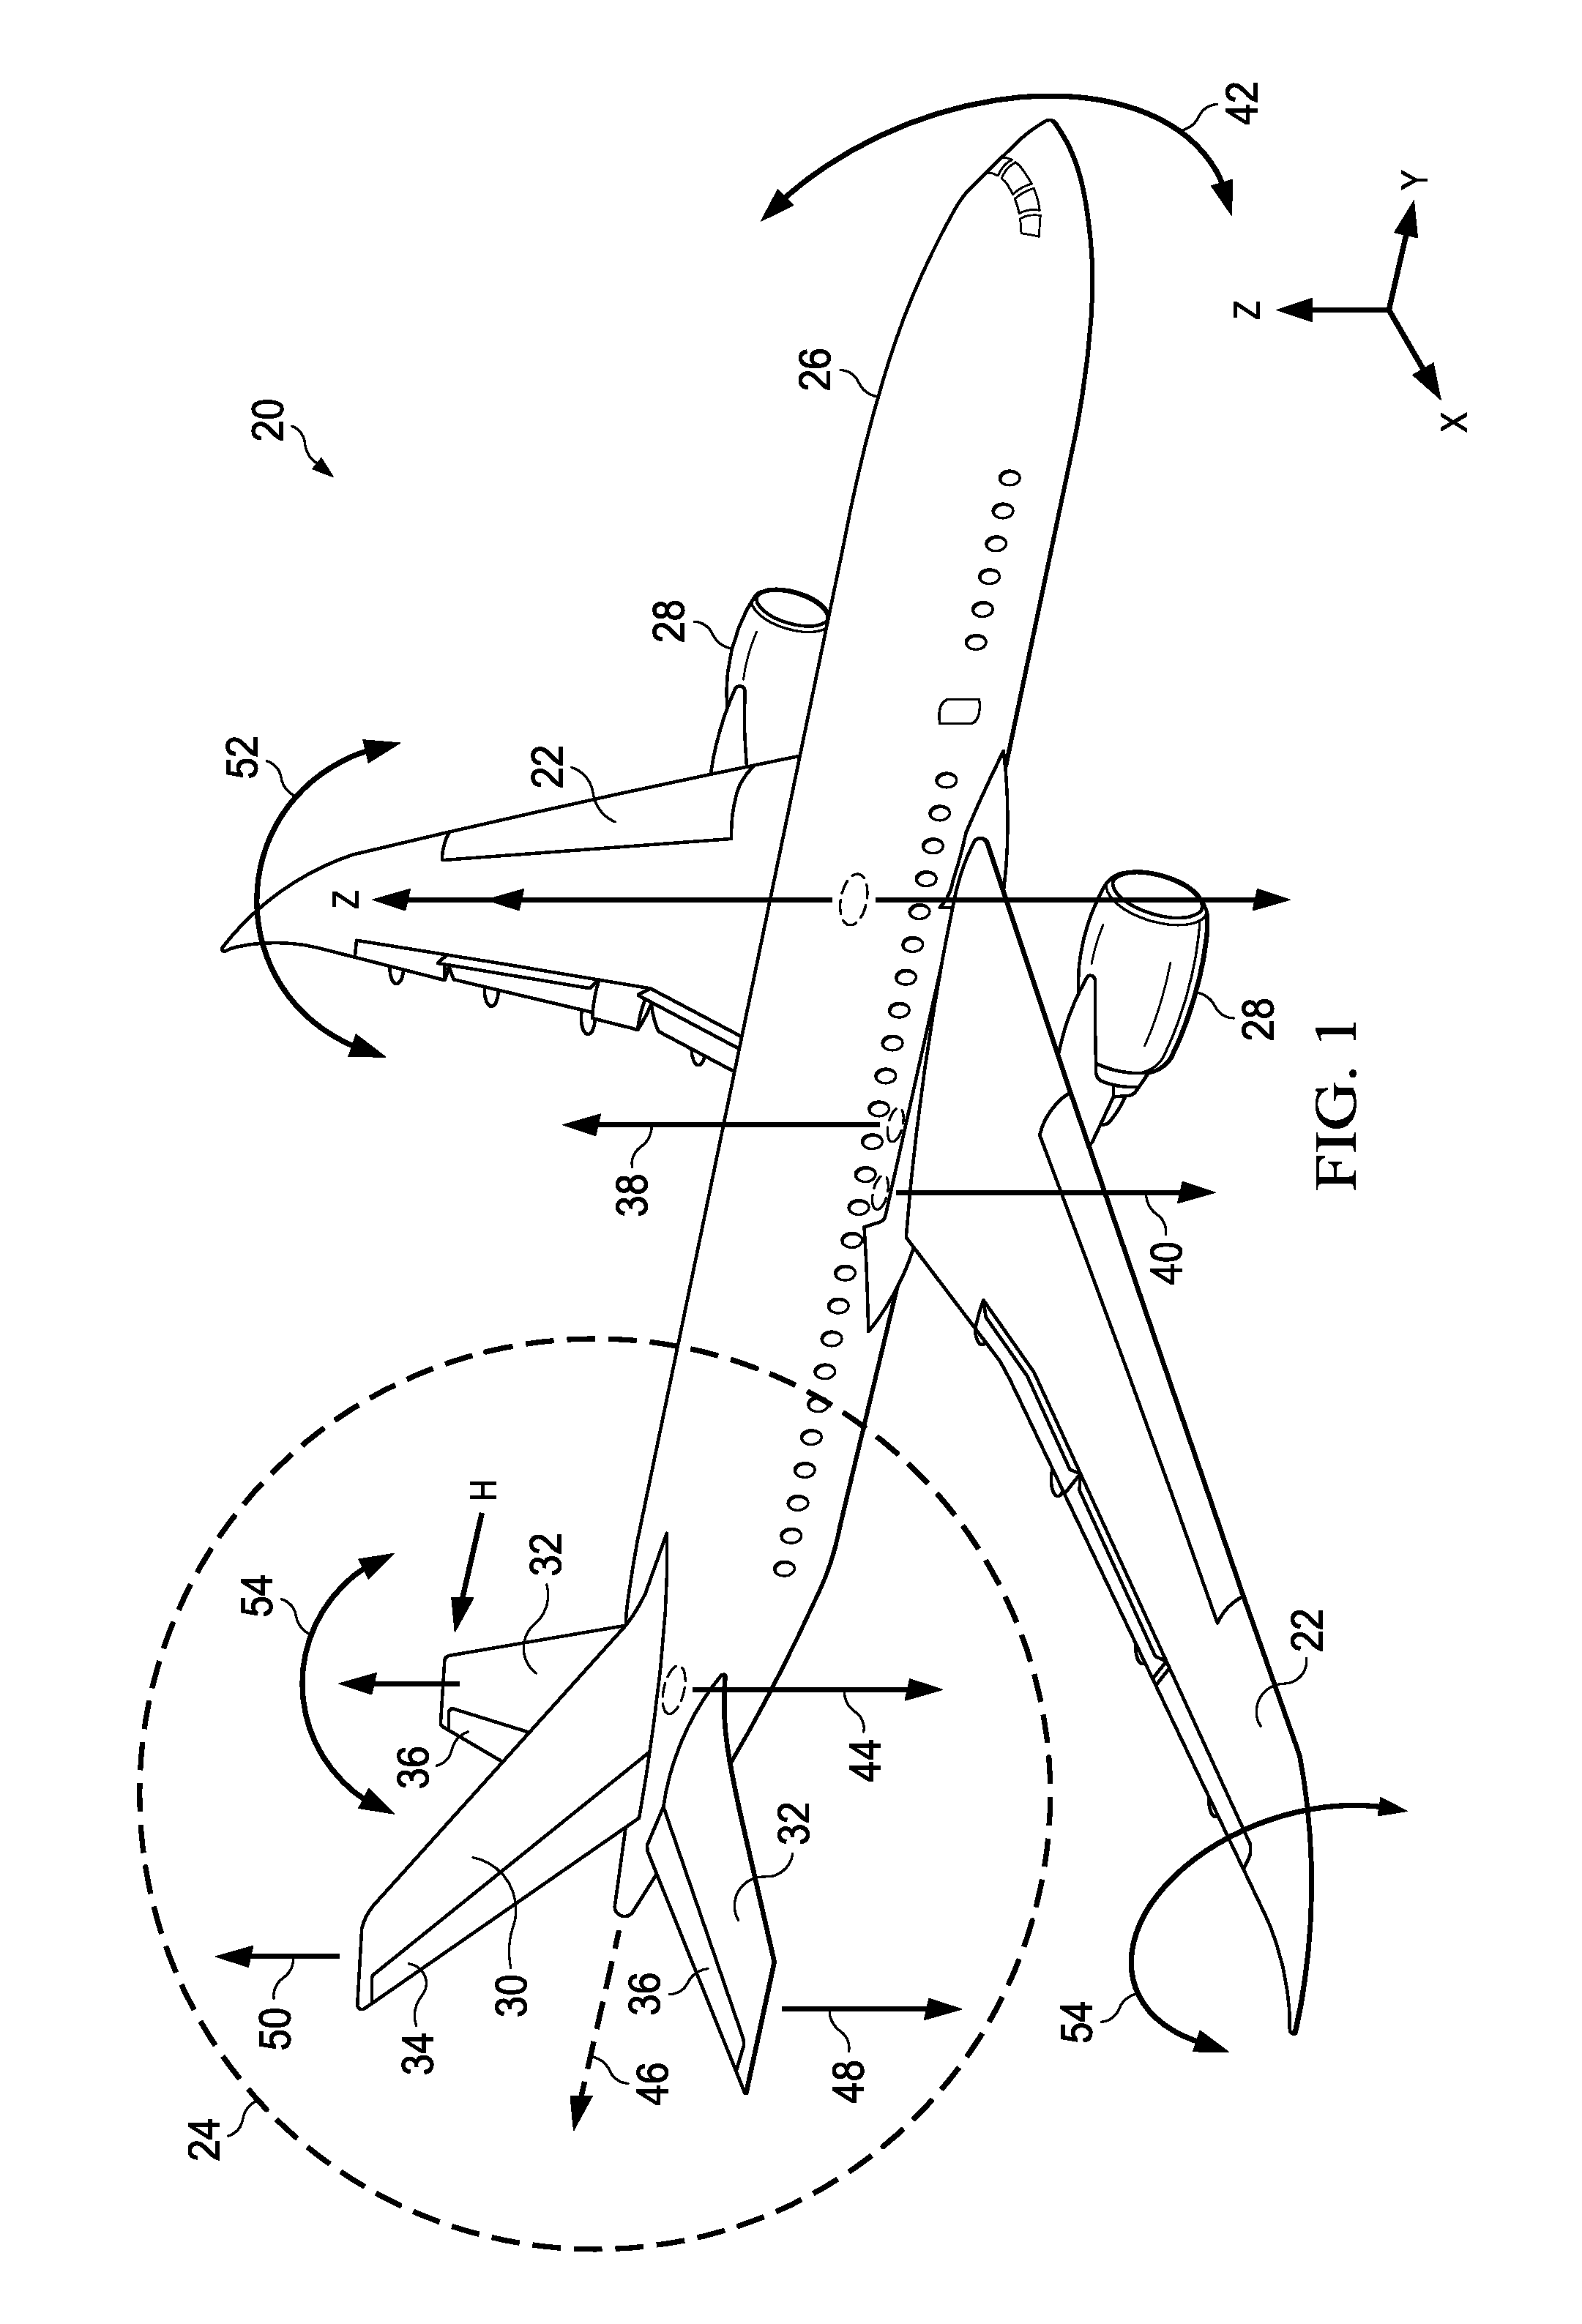 Bonded and tailorable composite assembly